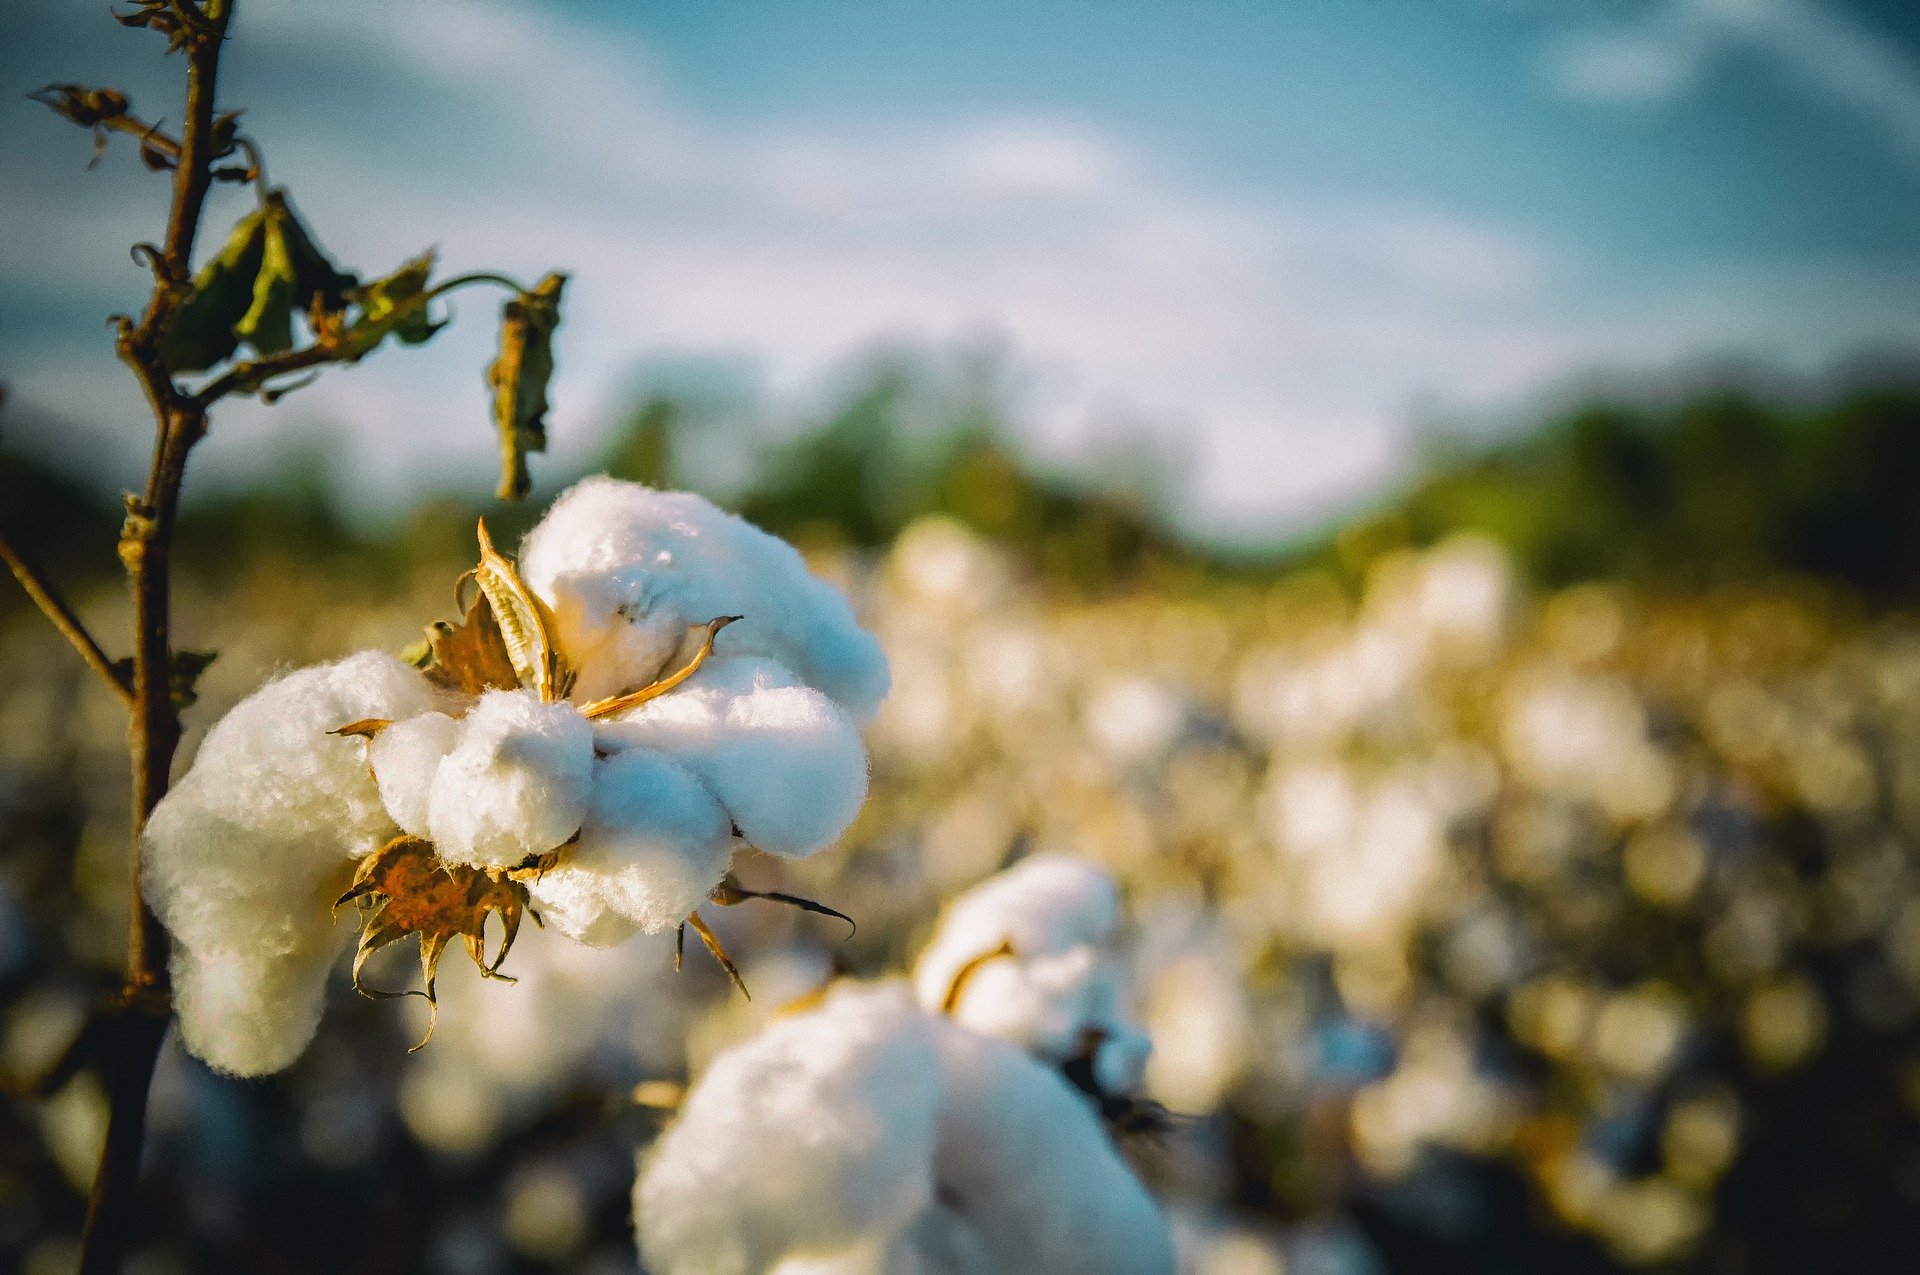 Organic Cotton Vs. Conventional Cotton: What's The Difference